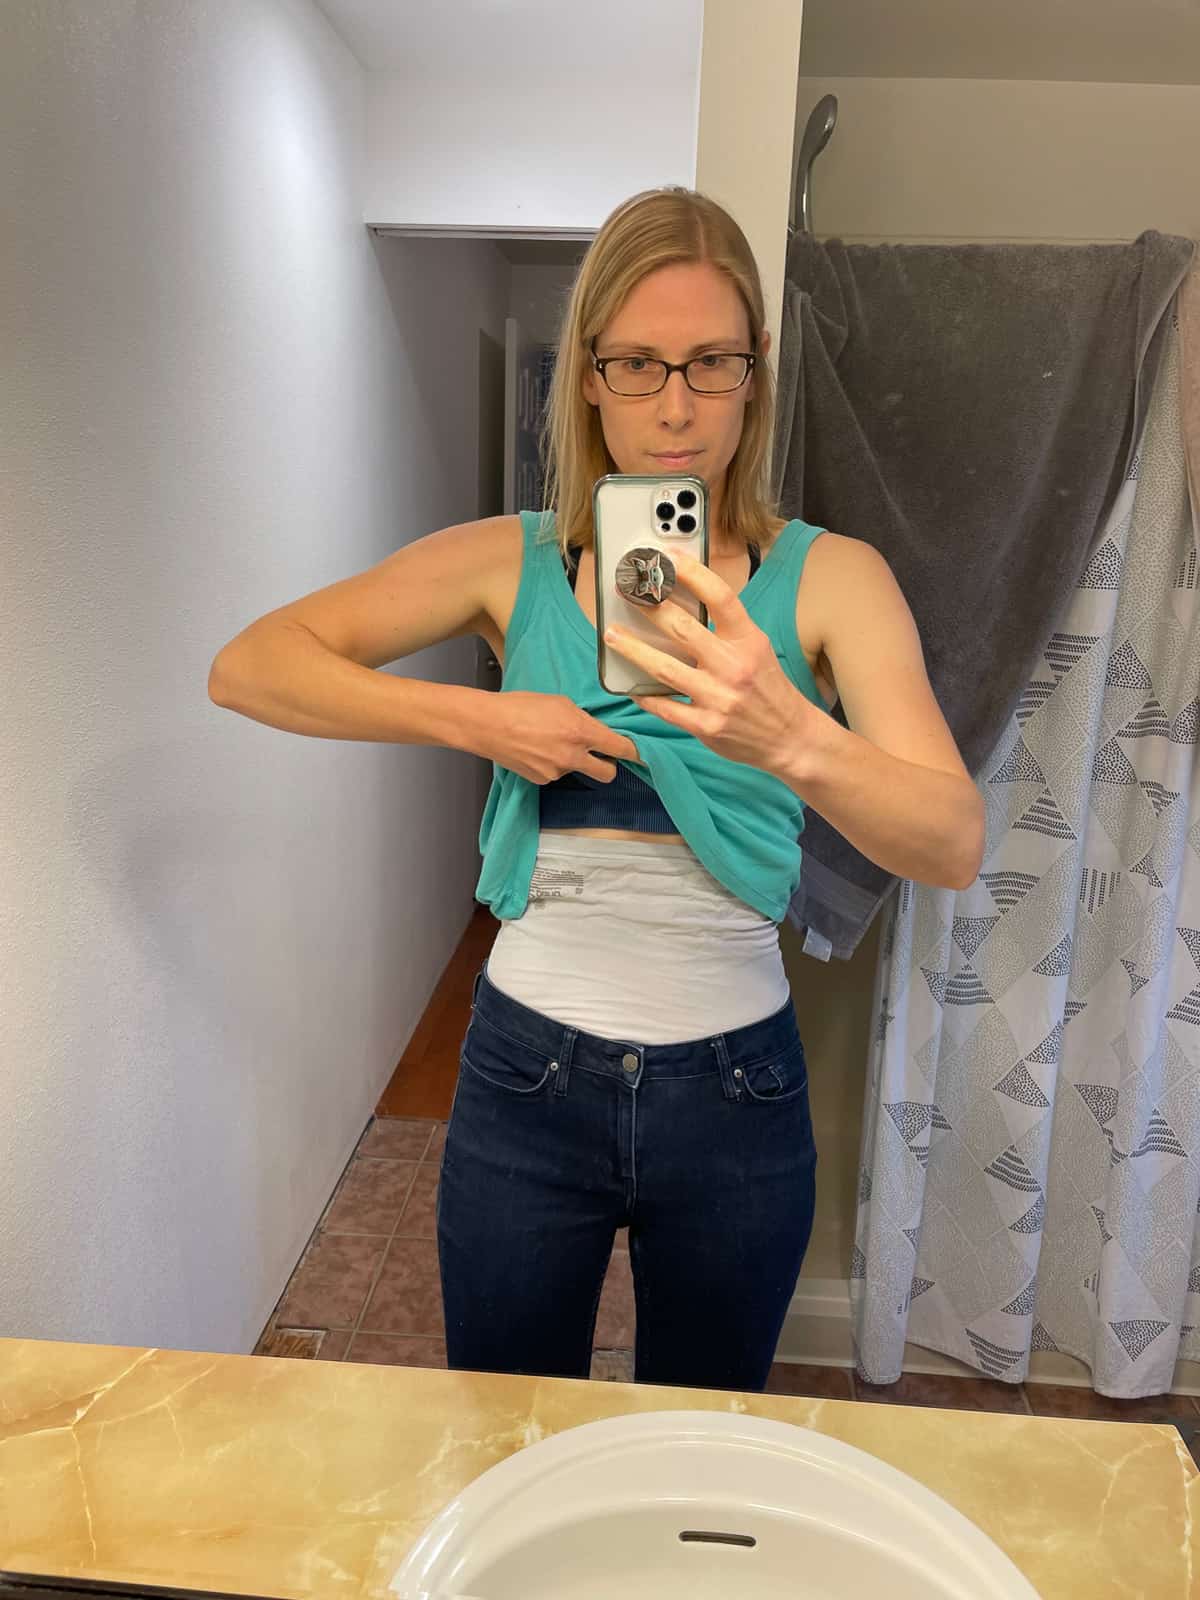 a woman in a teal tank top and glasses taking a picture in a bathroom mirror.